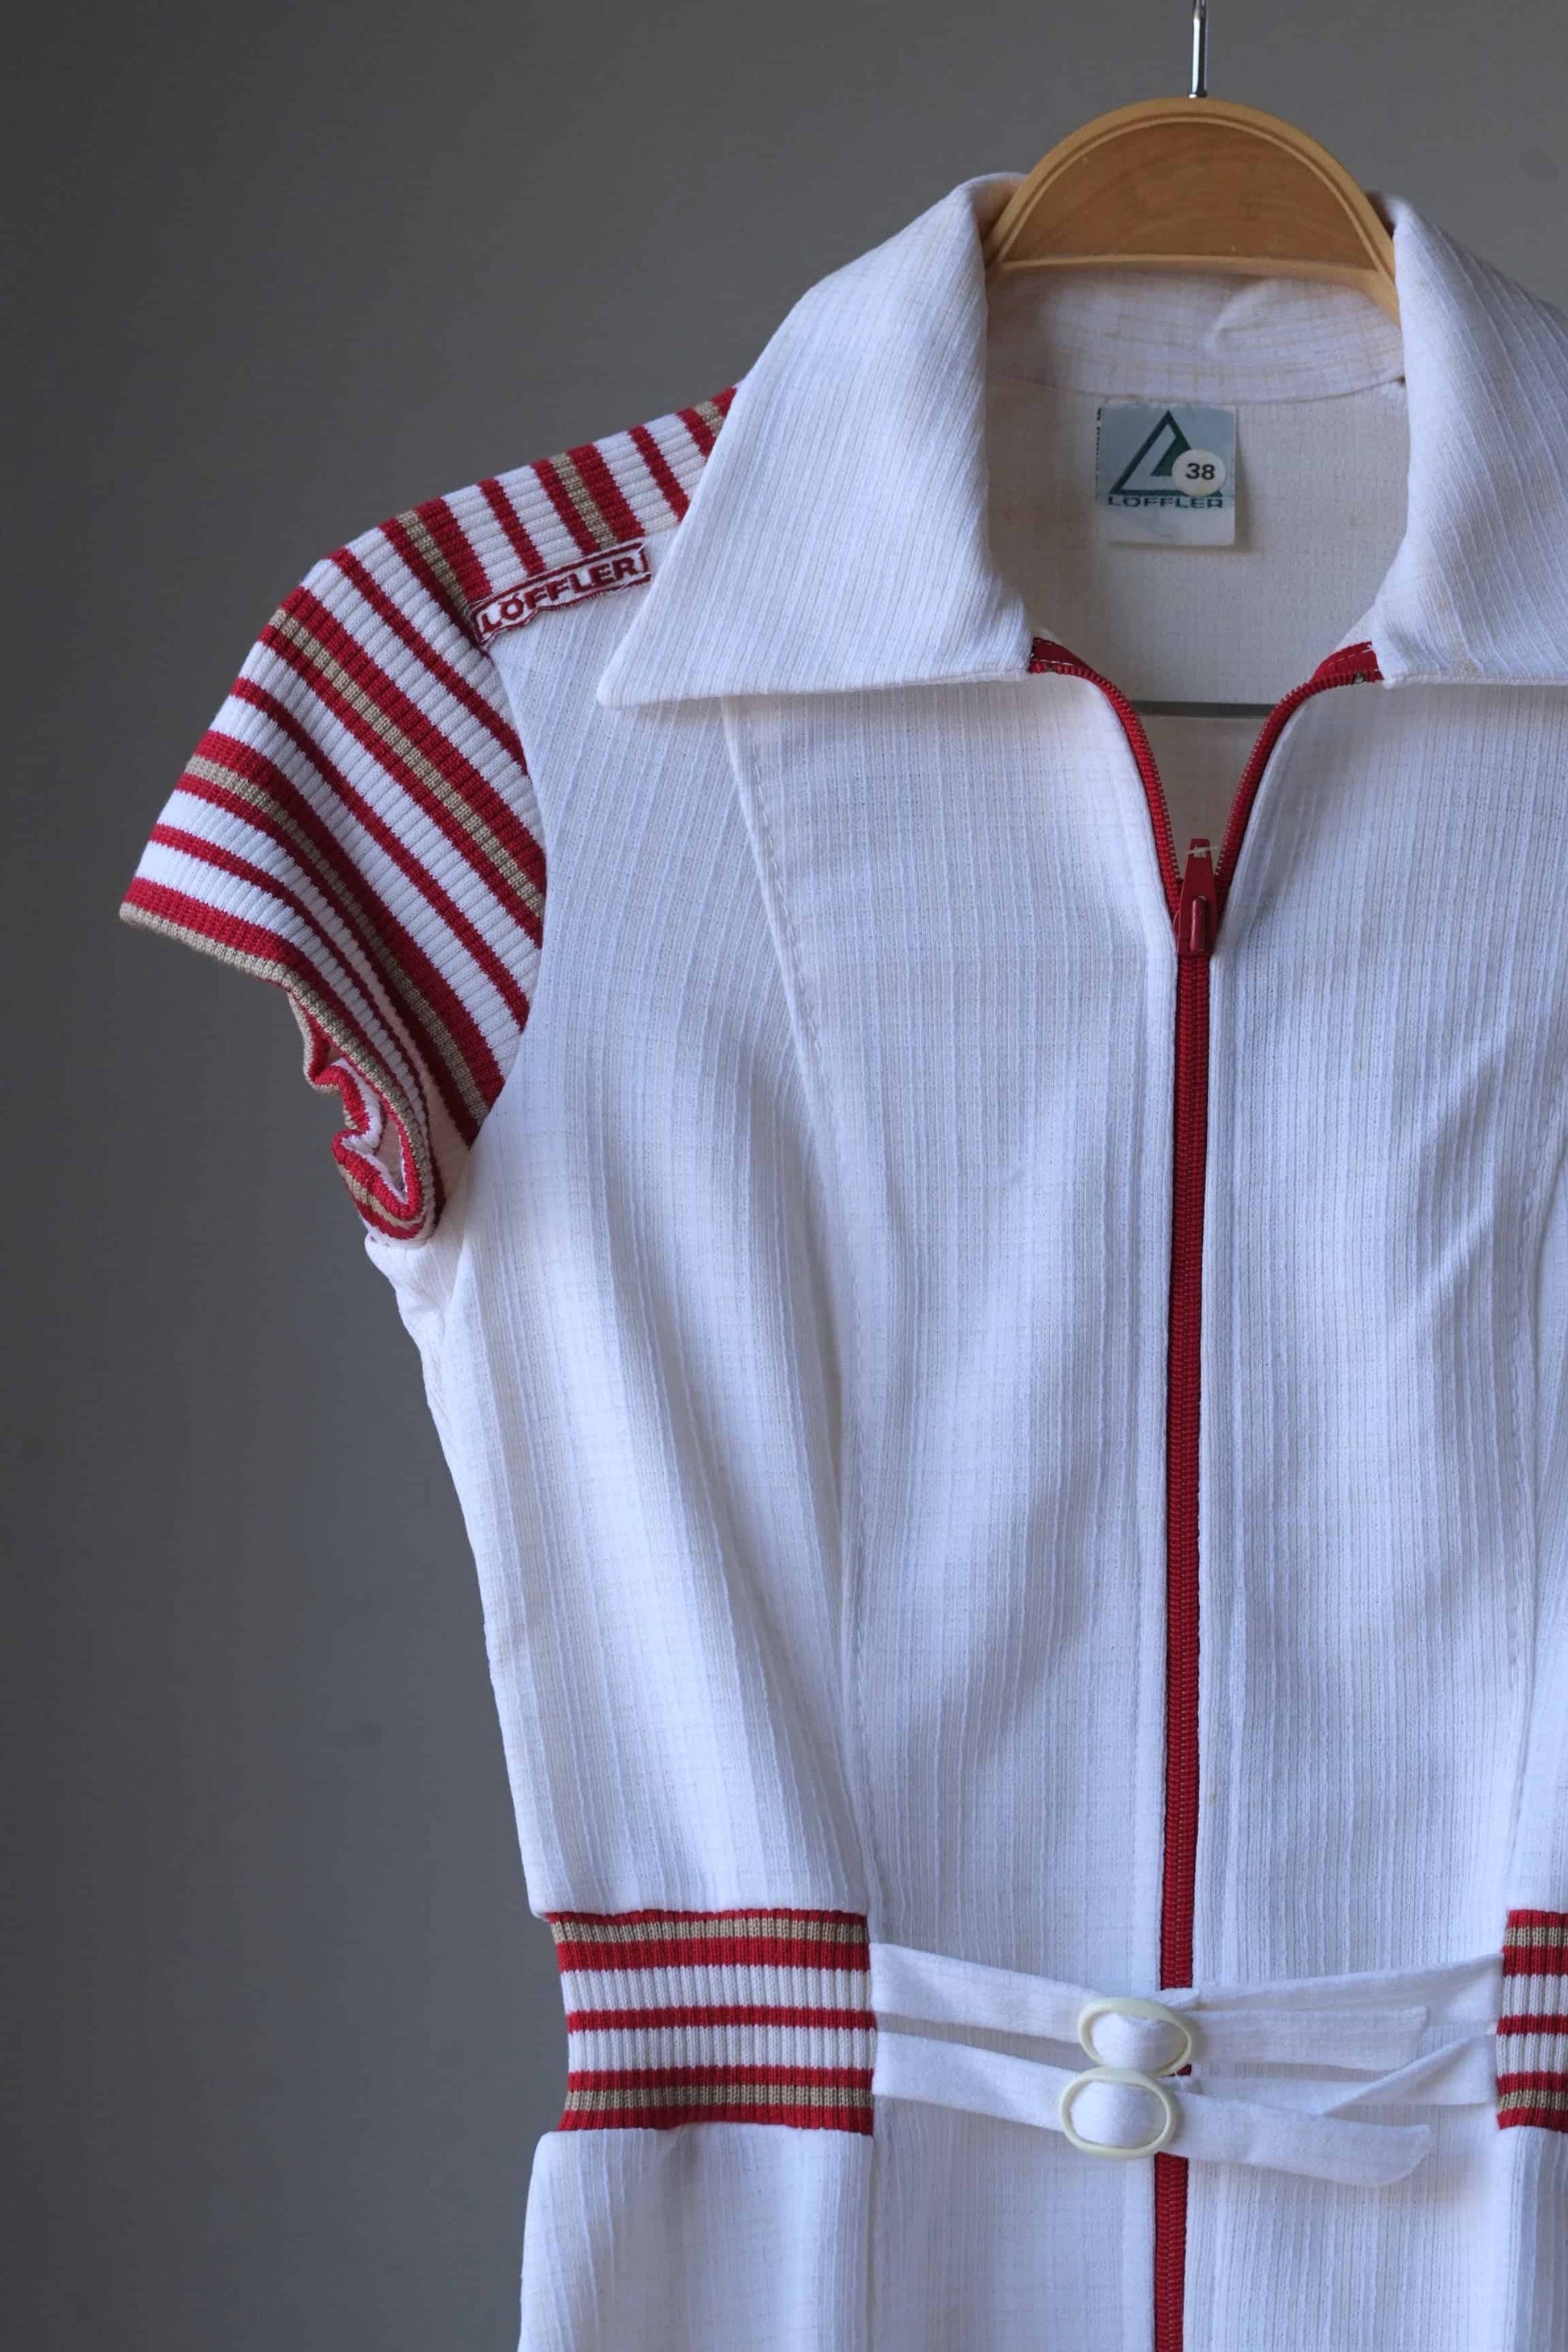 Vintage Red and White Tennis Dress